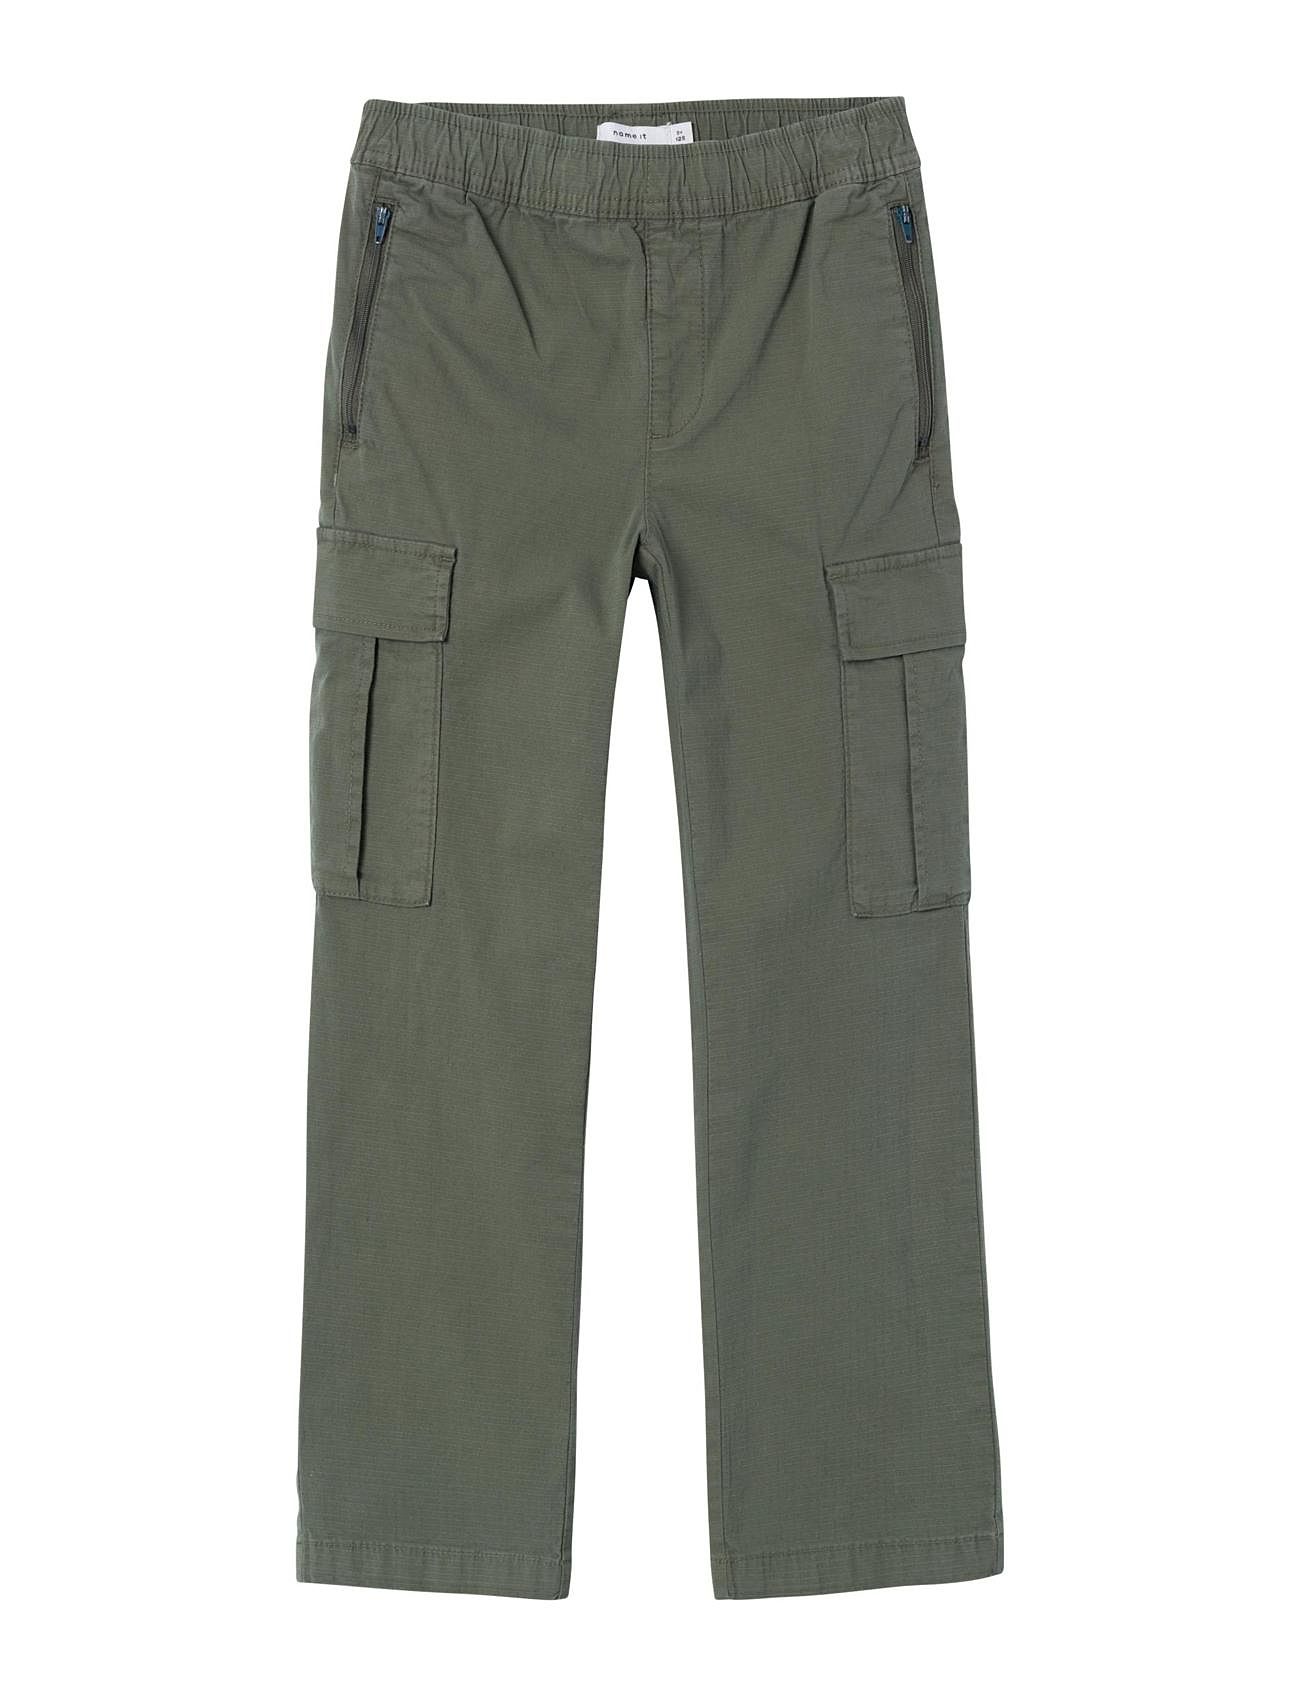 Nknrome Cargo Twi 4246-rs it Pant name St